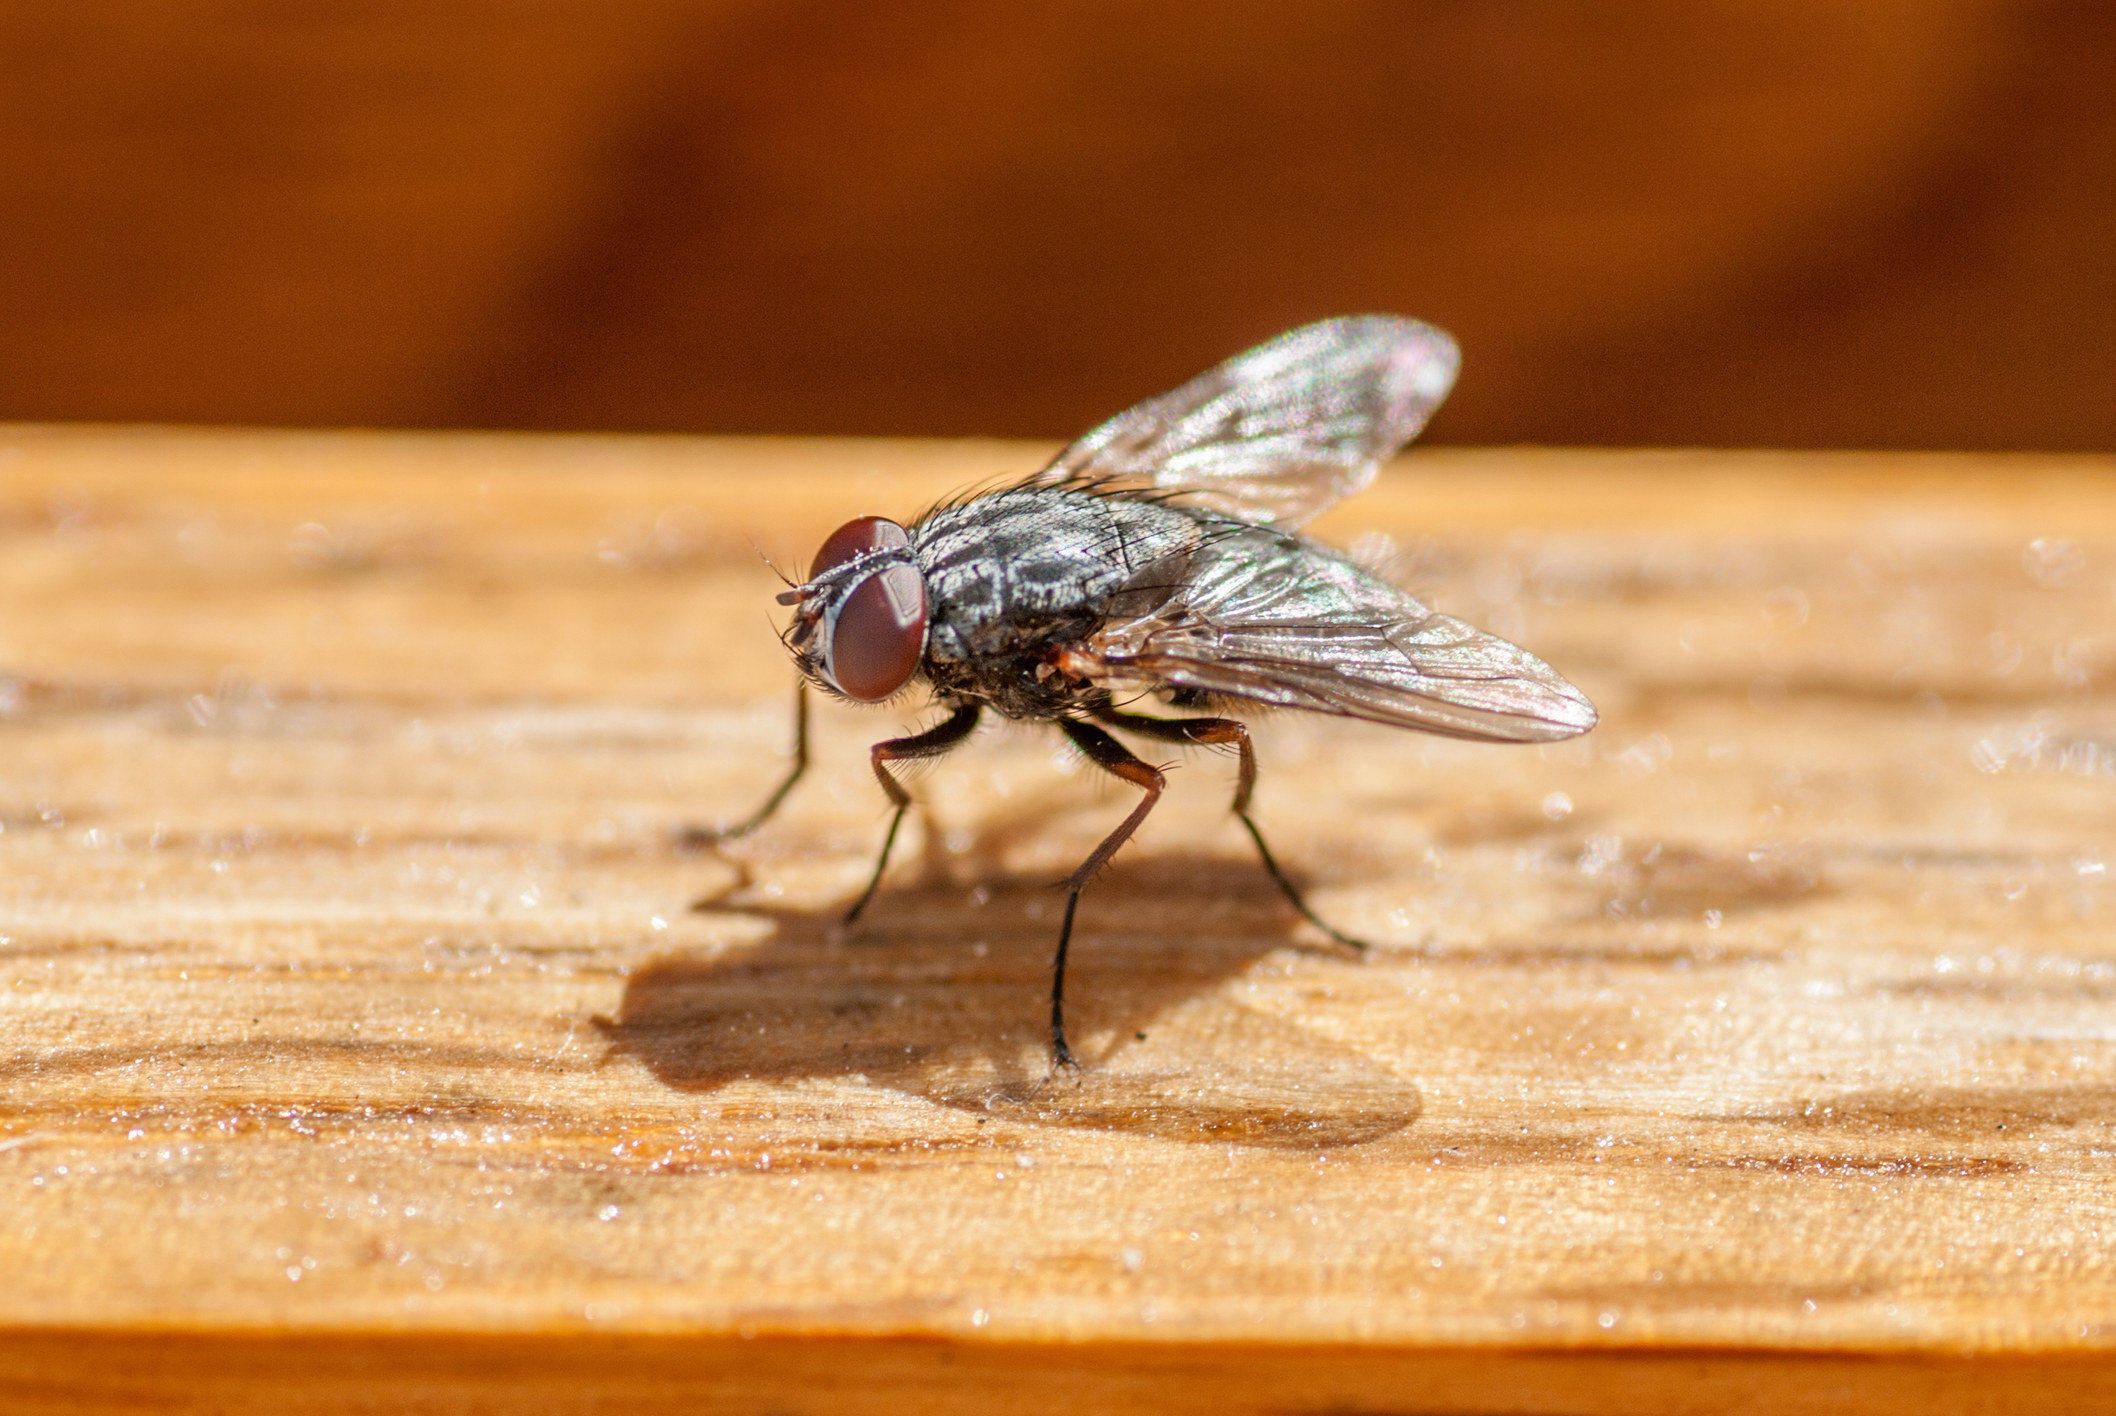 Up-close photograph of a fly on a wooden table in springtime